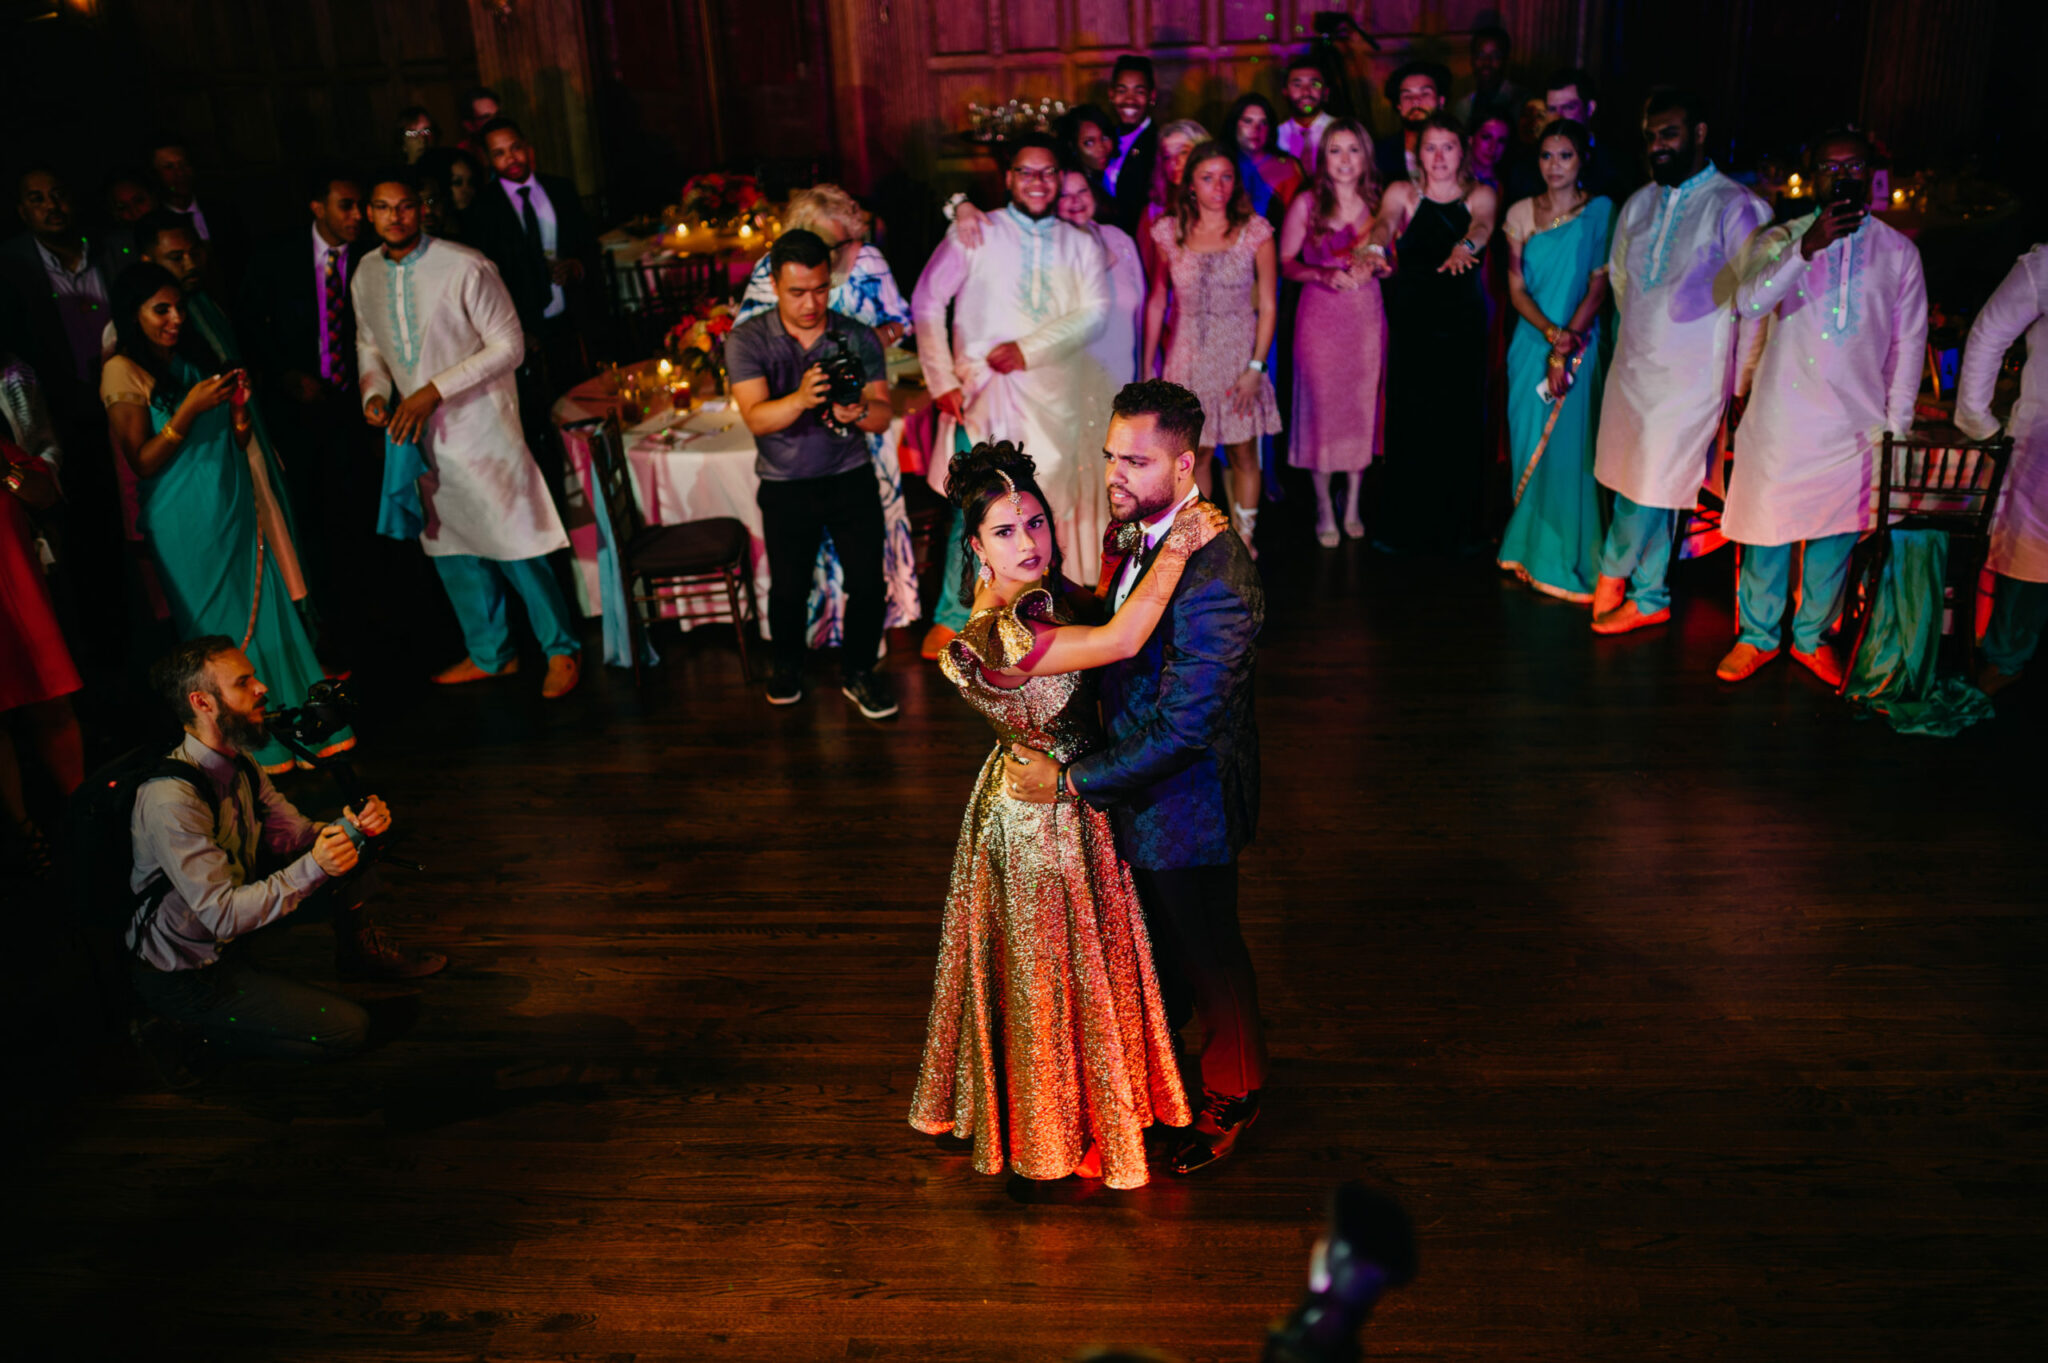 Aria & Joseph's Hindu infused Gem Theatre Detroit wedding was nothing short of amazing. From the colors, the details, their personalities and even the love surrounding them made the day magnificent.